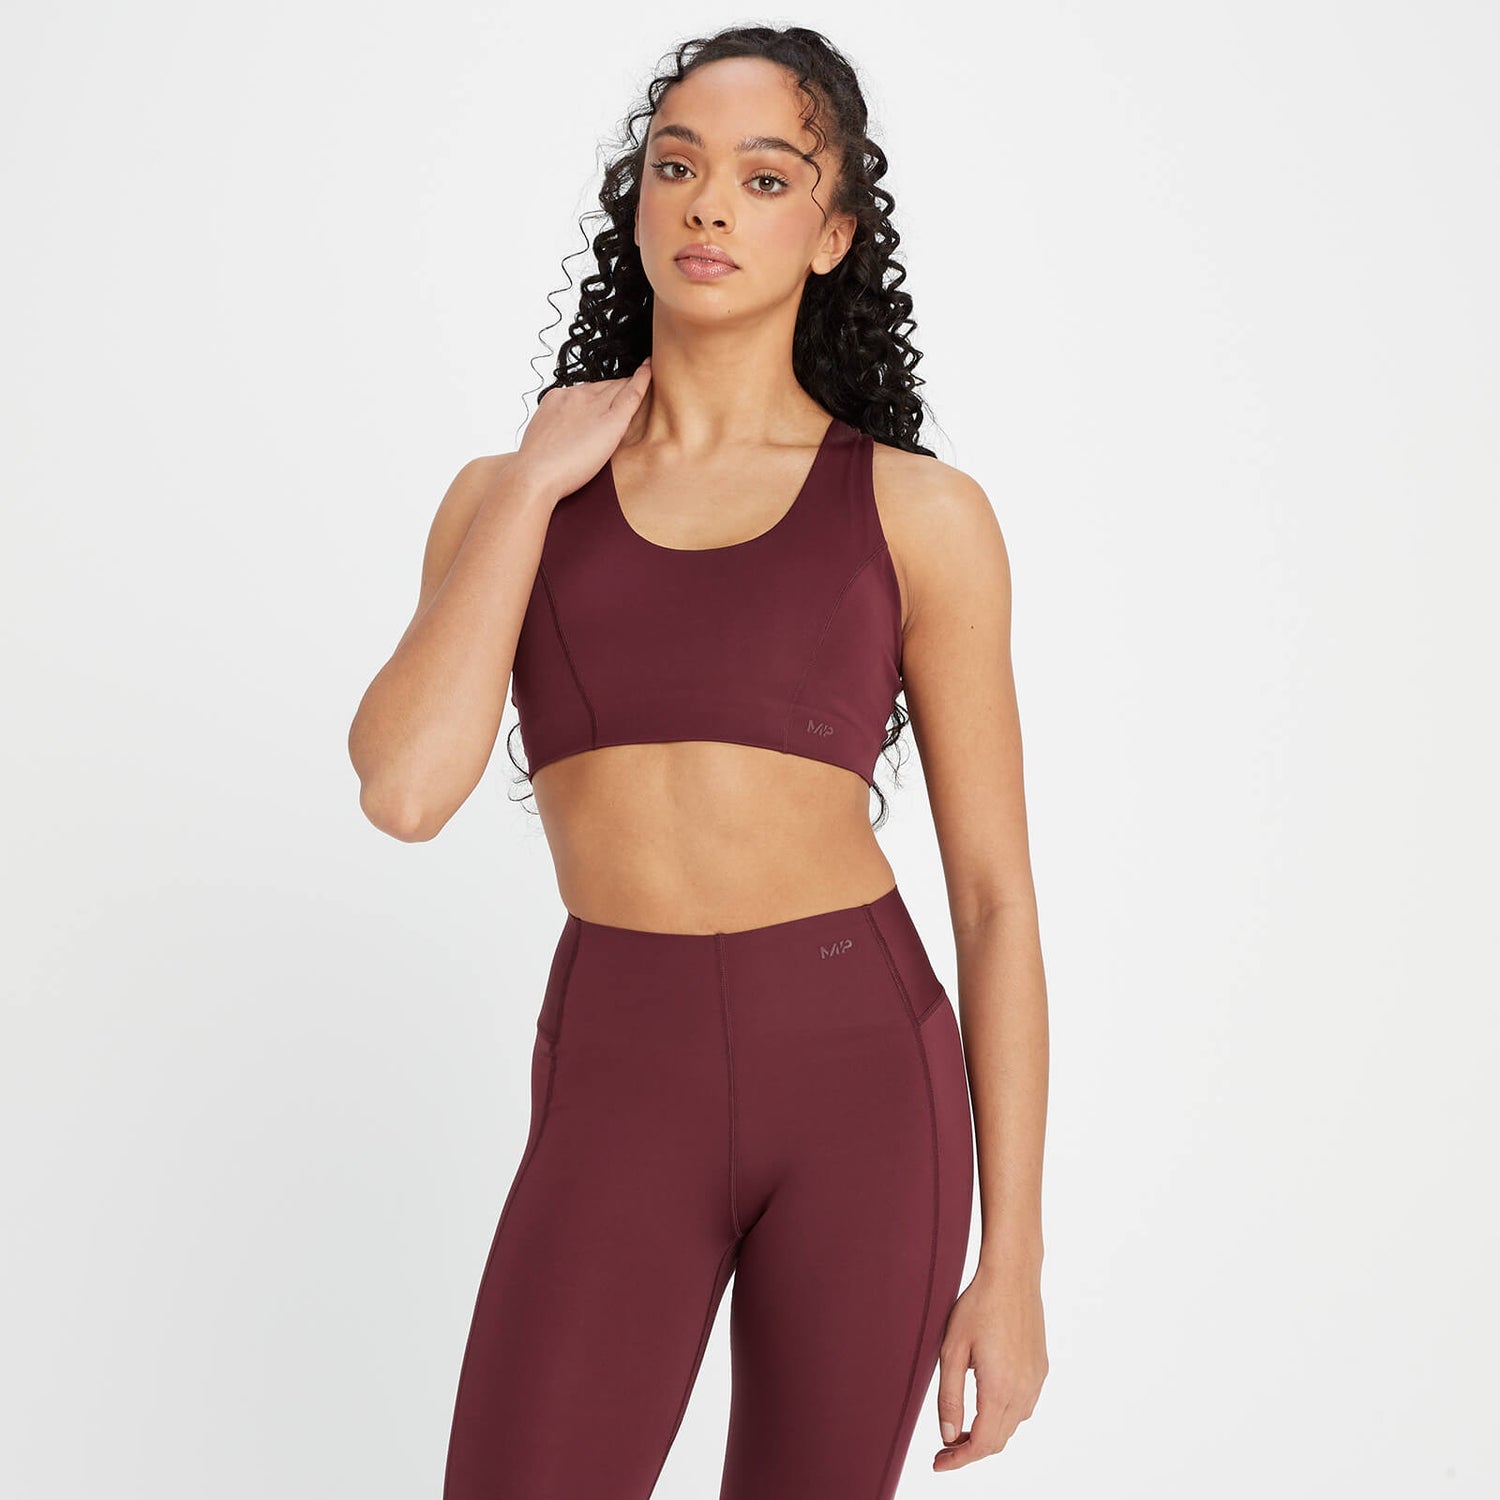 MP Women's Composure Repreve® Sports Bra - Washed Oxblood - S